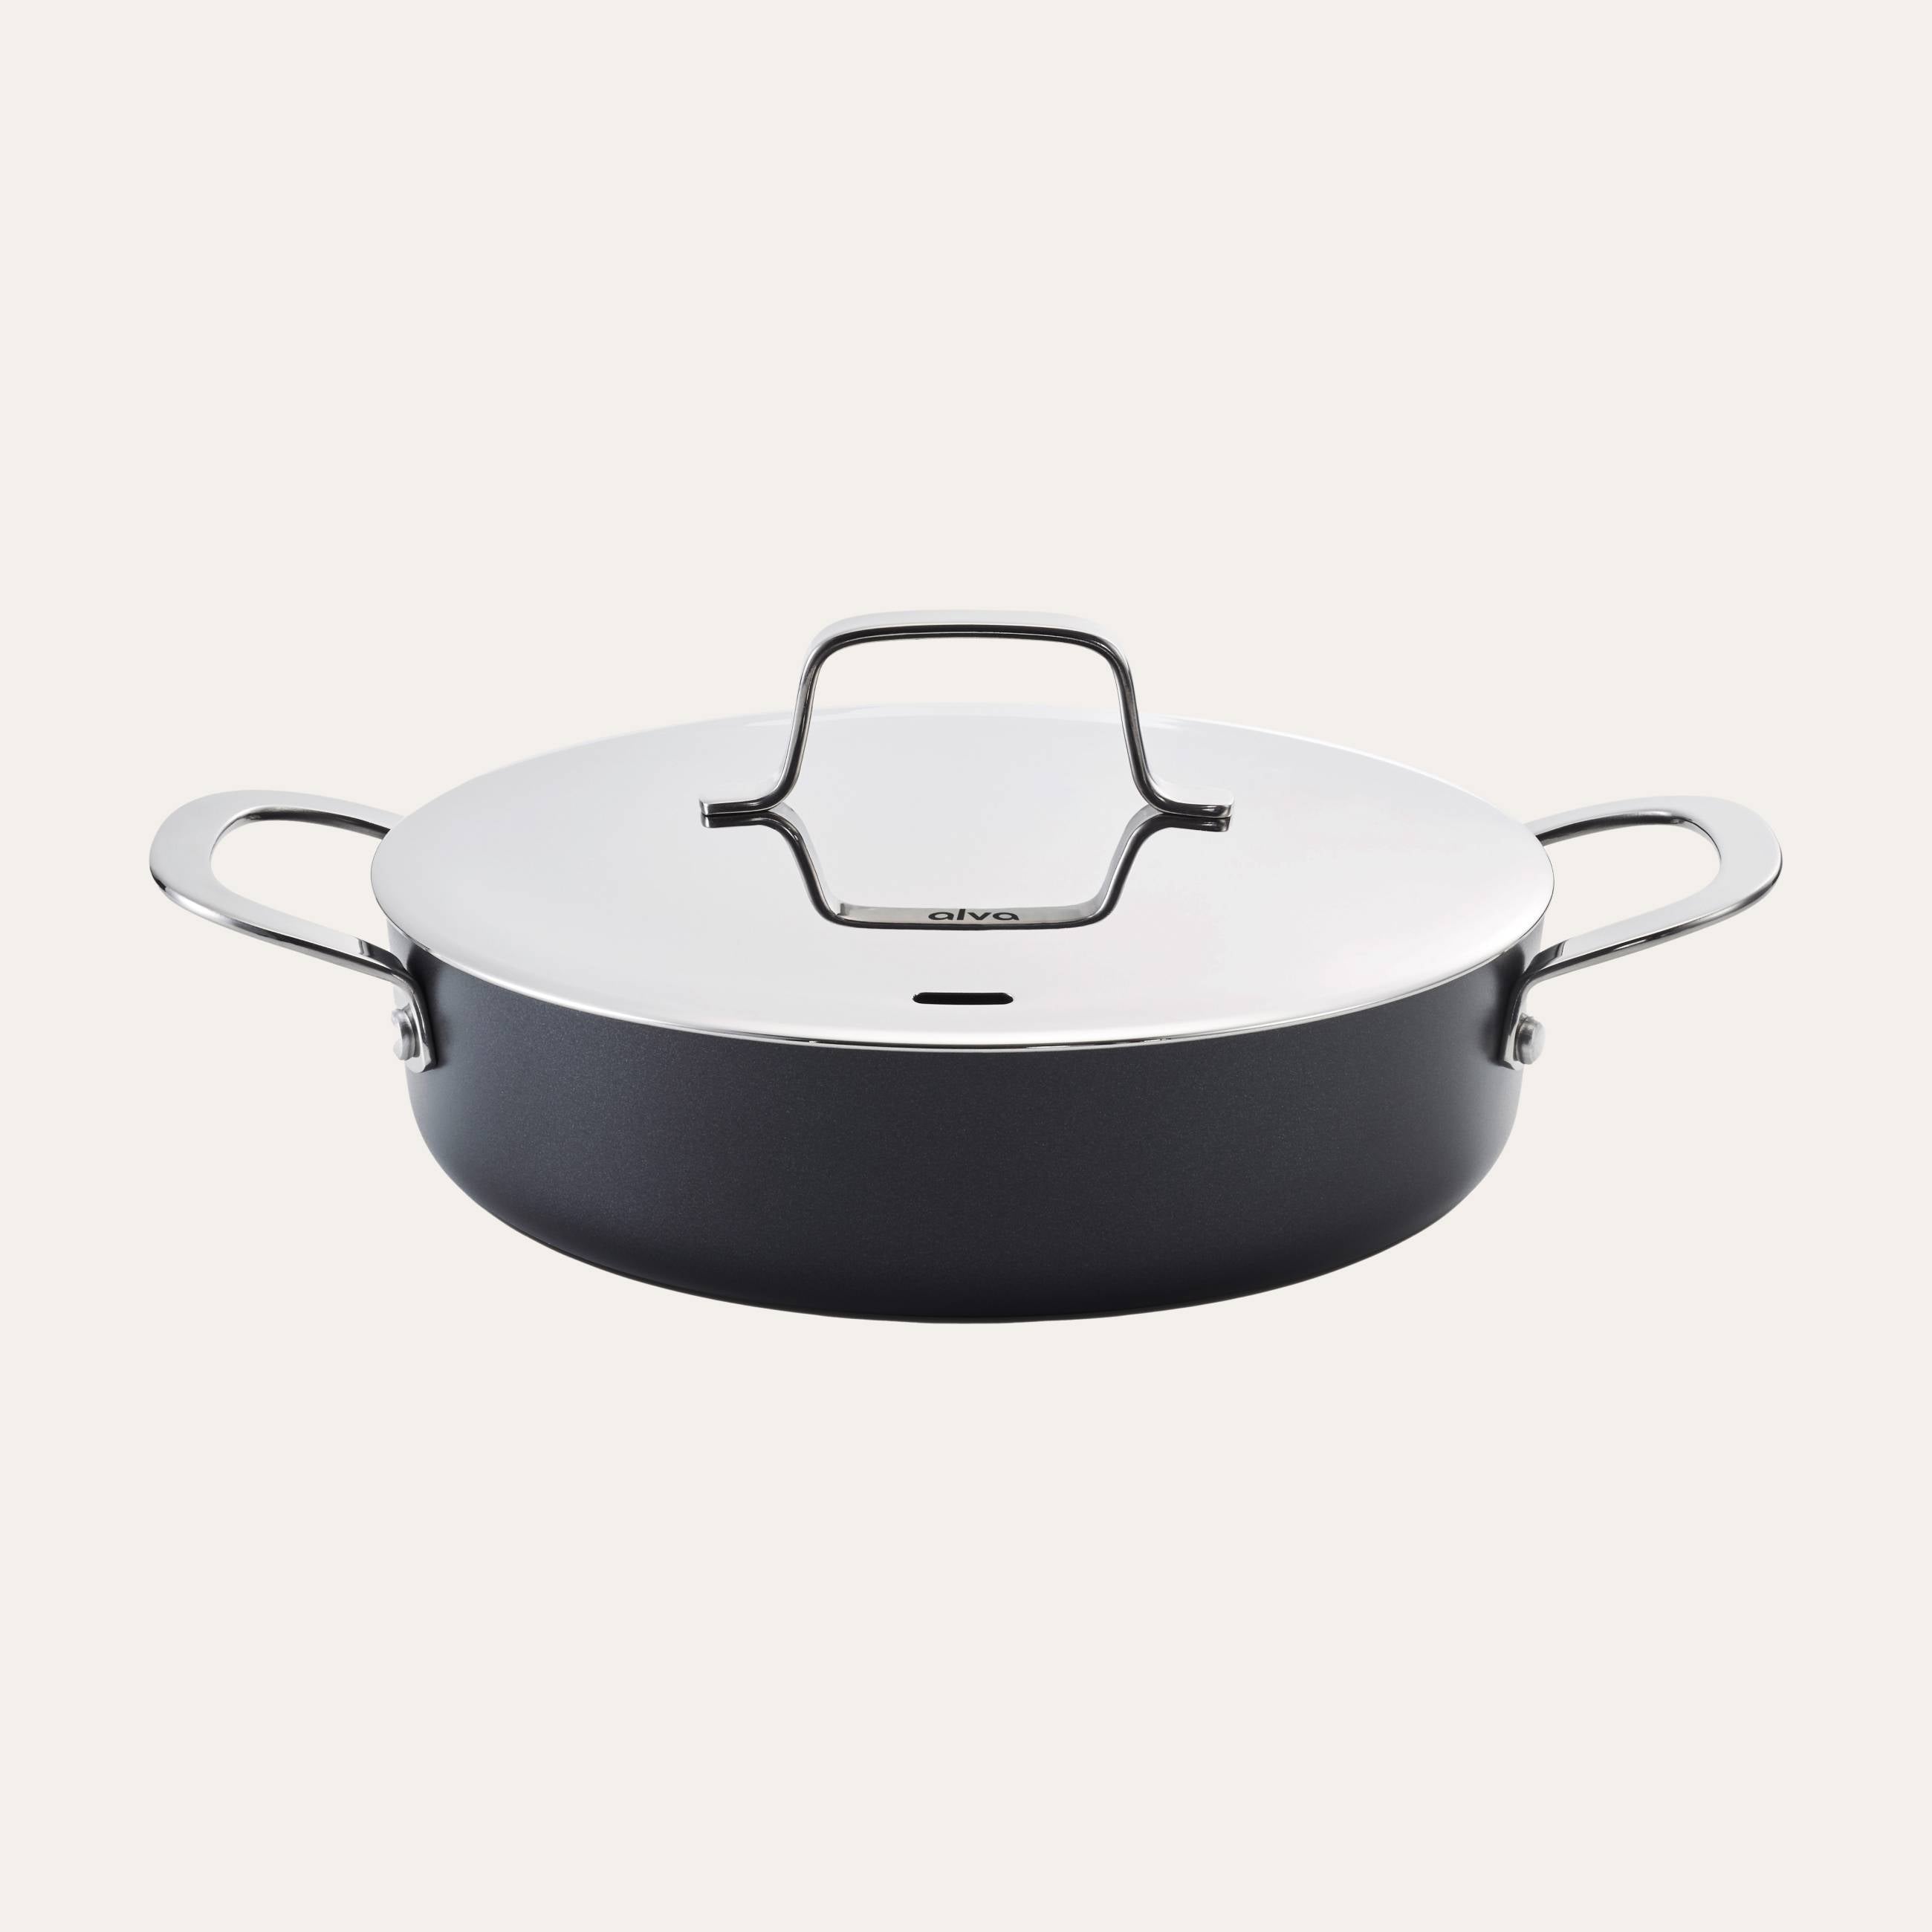 PFAS-free cookware: A non-toxic, nonstick fish pan for your kitchen